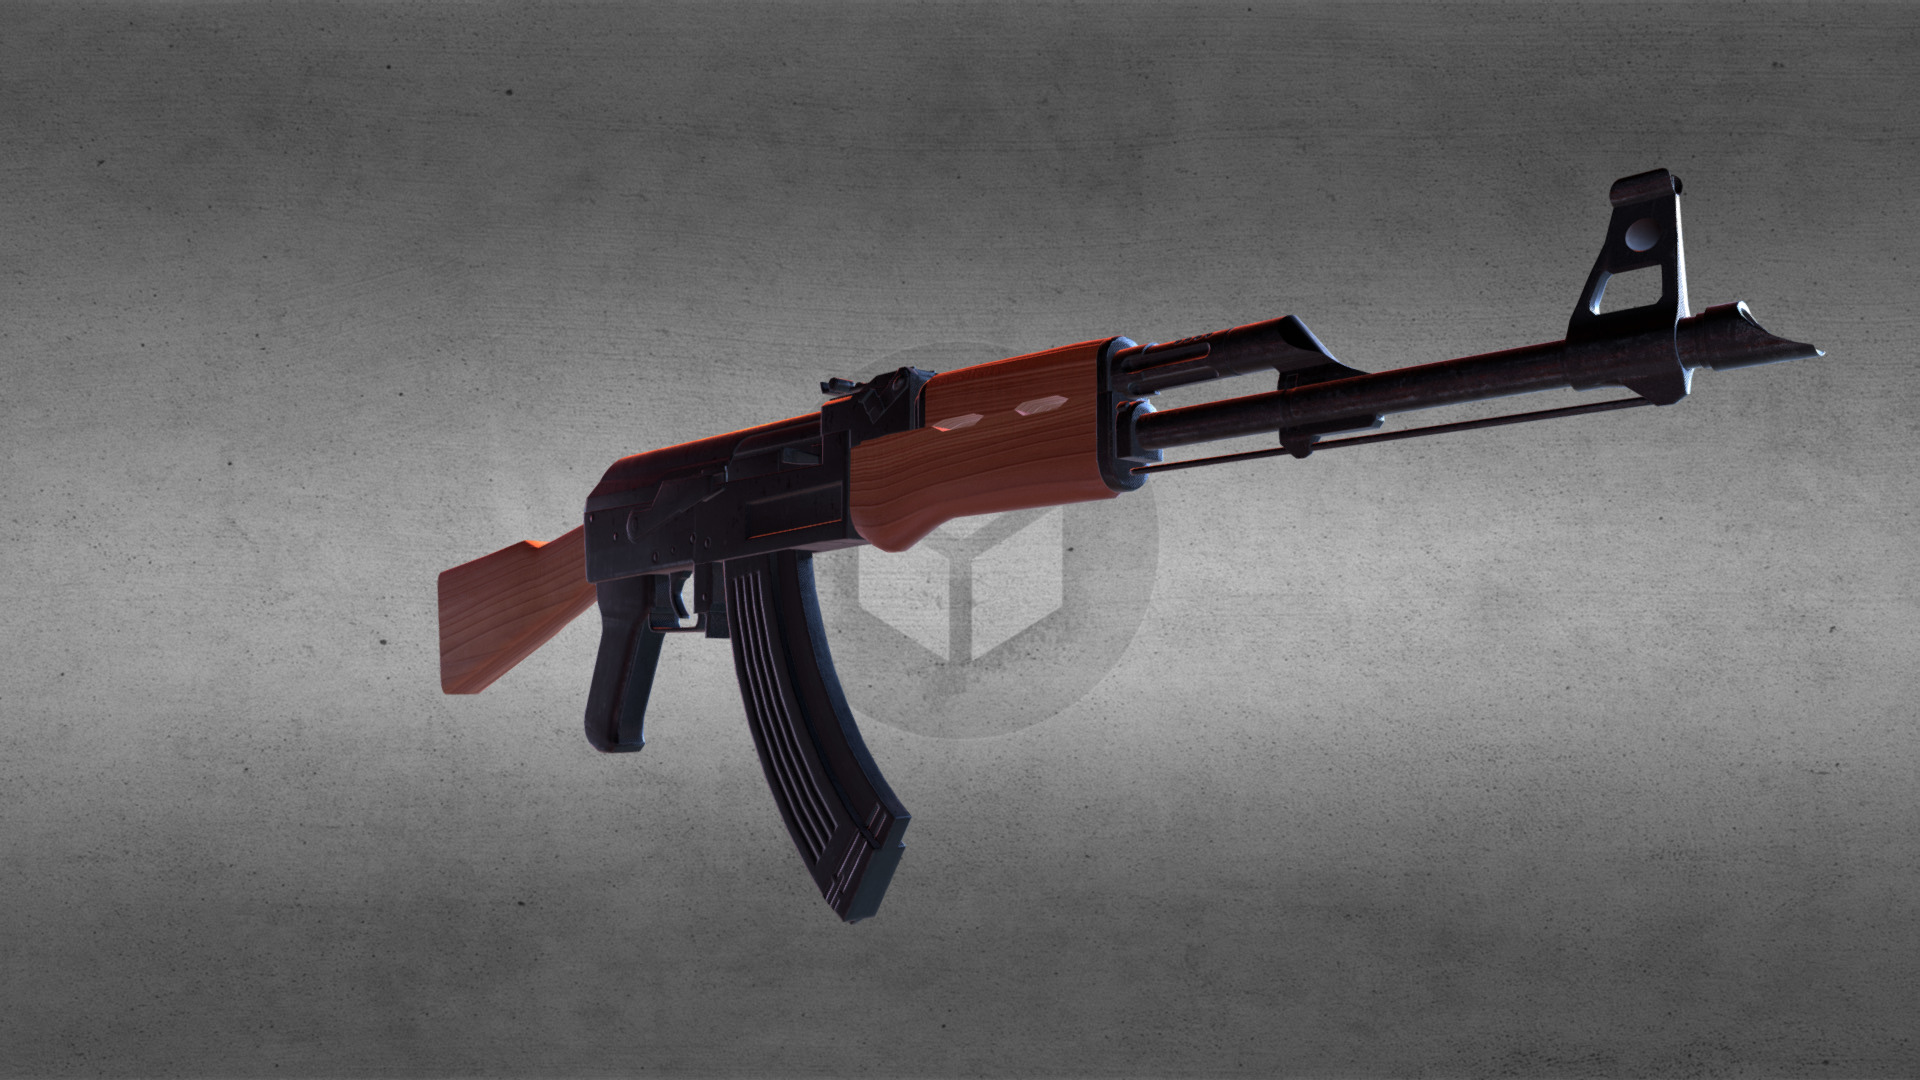 3D model AK47 - This is a 3D model of the AK47. The 3D model is about a gun on a table.